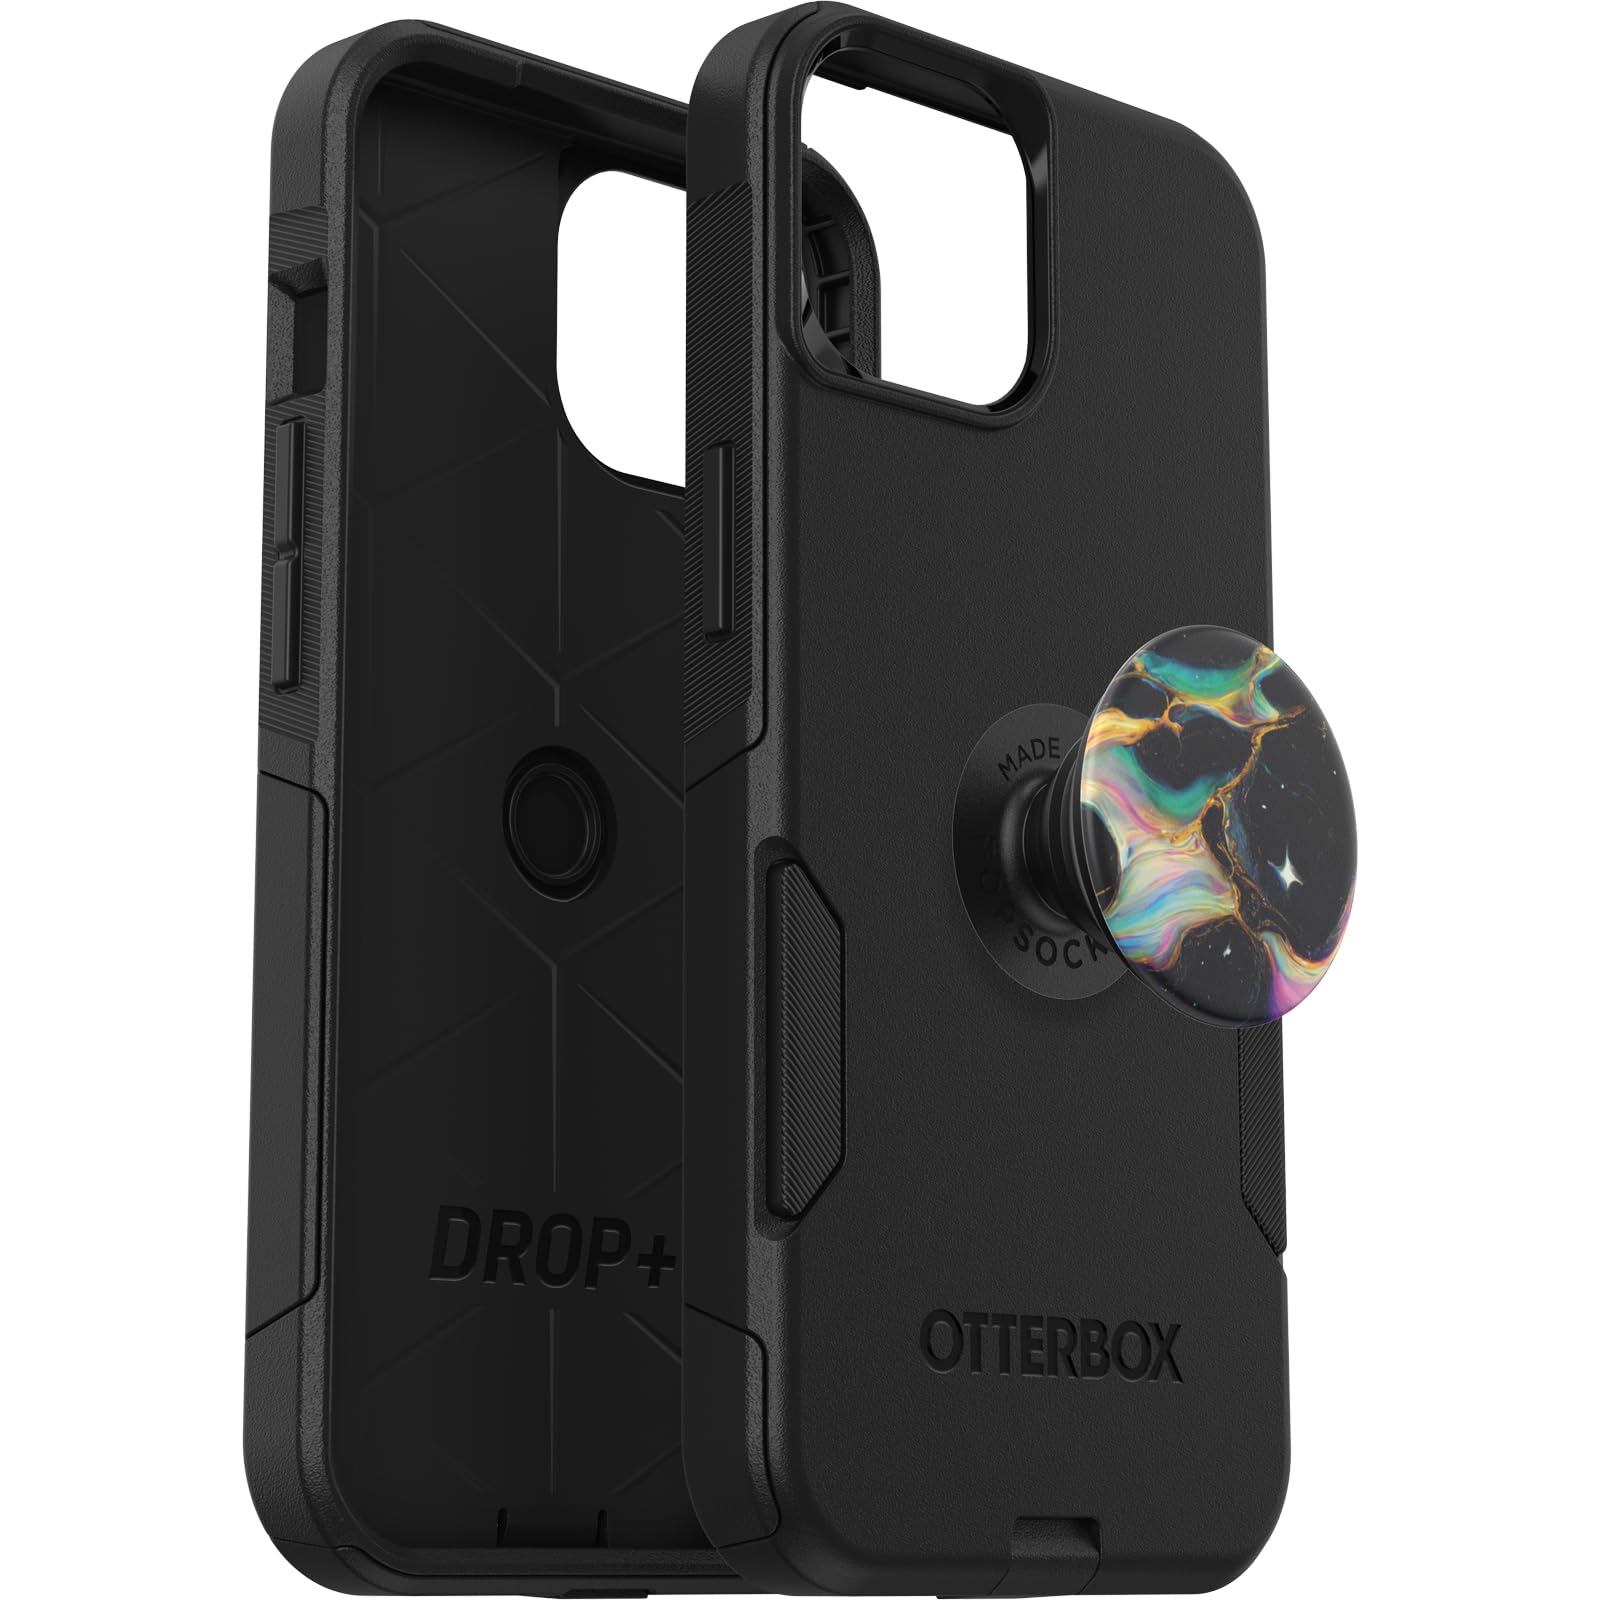 Bundle: Commuter Series Case for iPhone 13/14/15 - (BLACK) + PopSockets PopGrip - (ELECTRIC OIL SLICK), Slim, Tough, and Pocket-Friendly Case With Port Protection and Included PopGrip